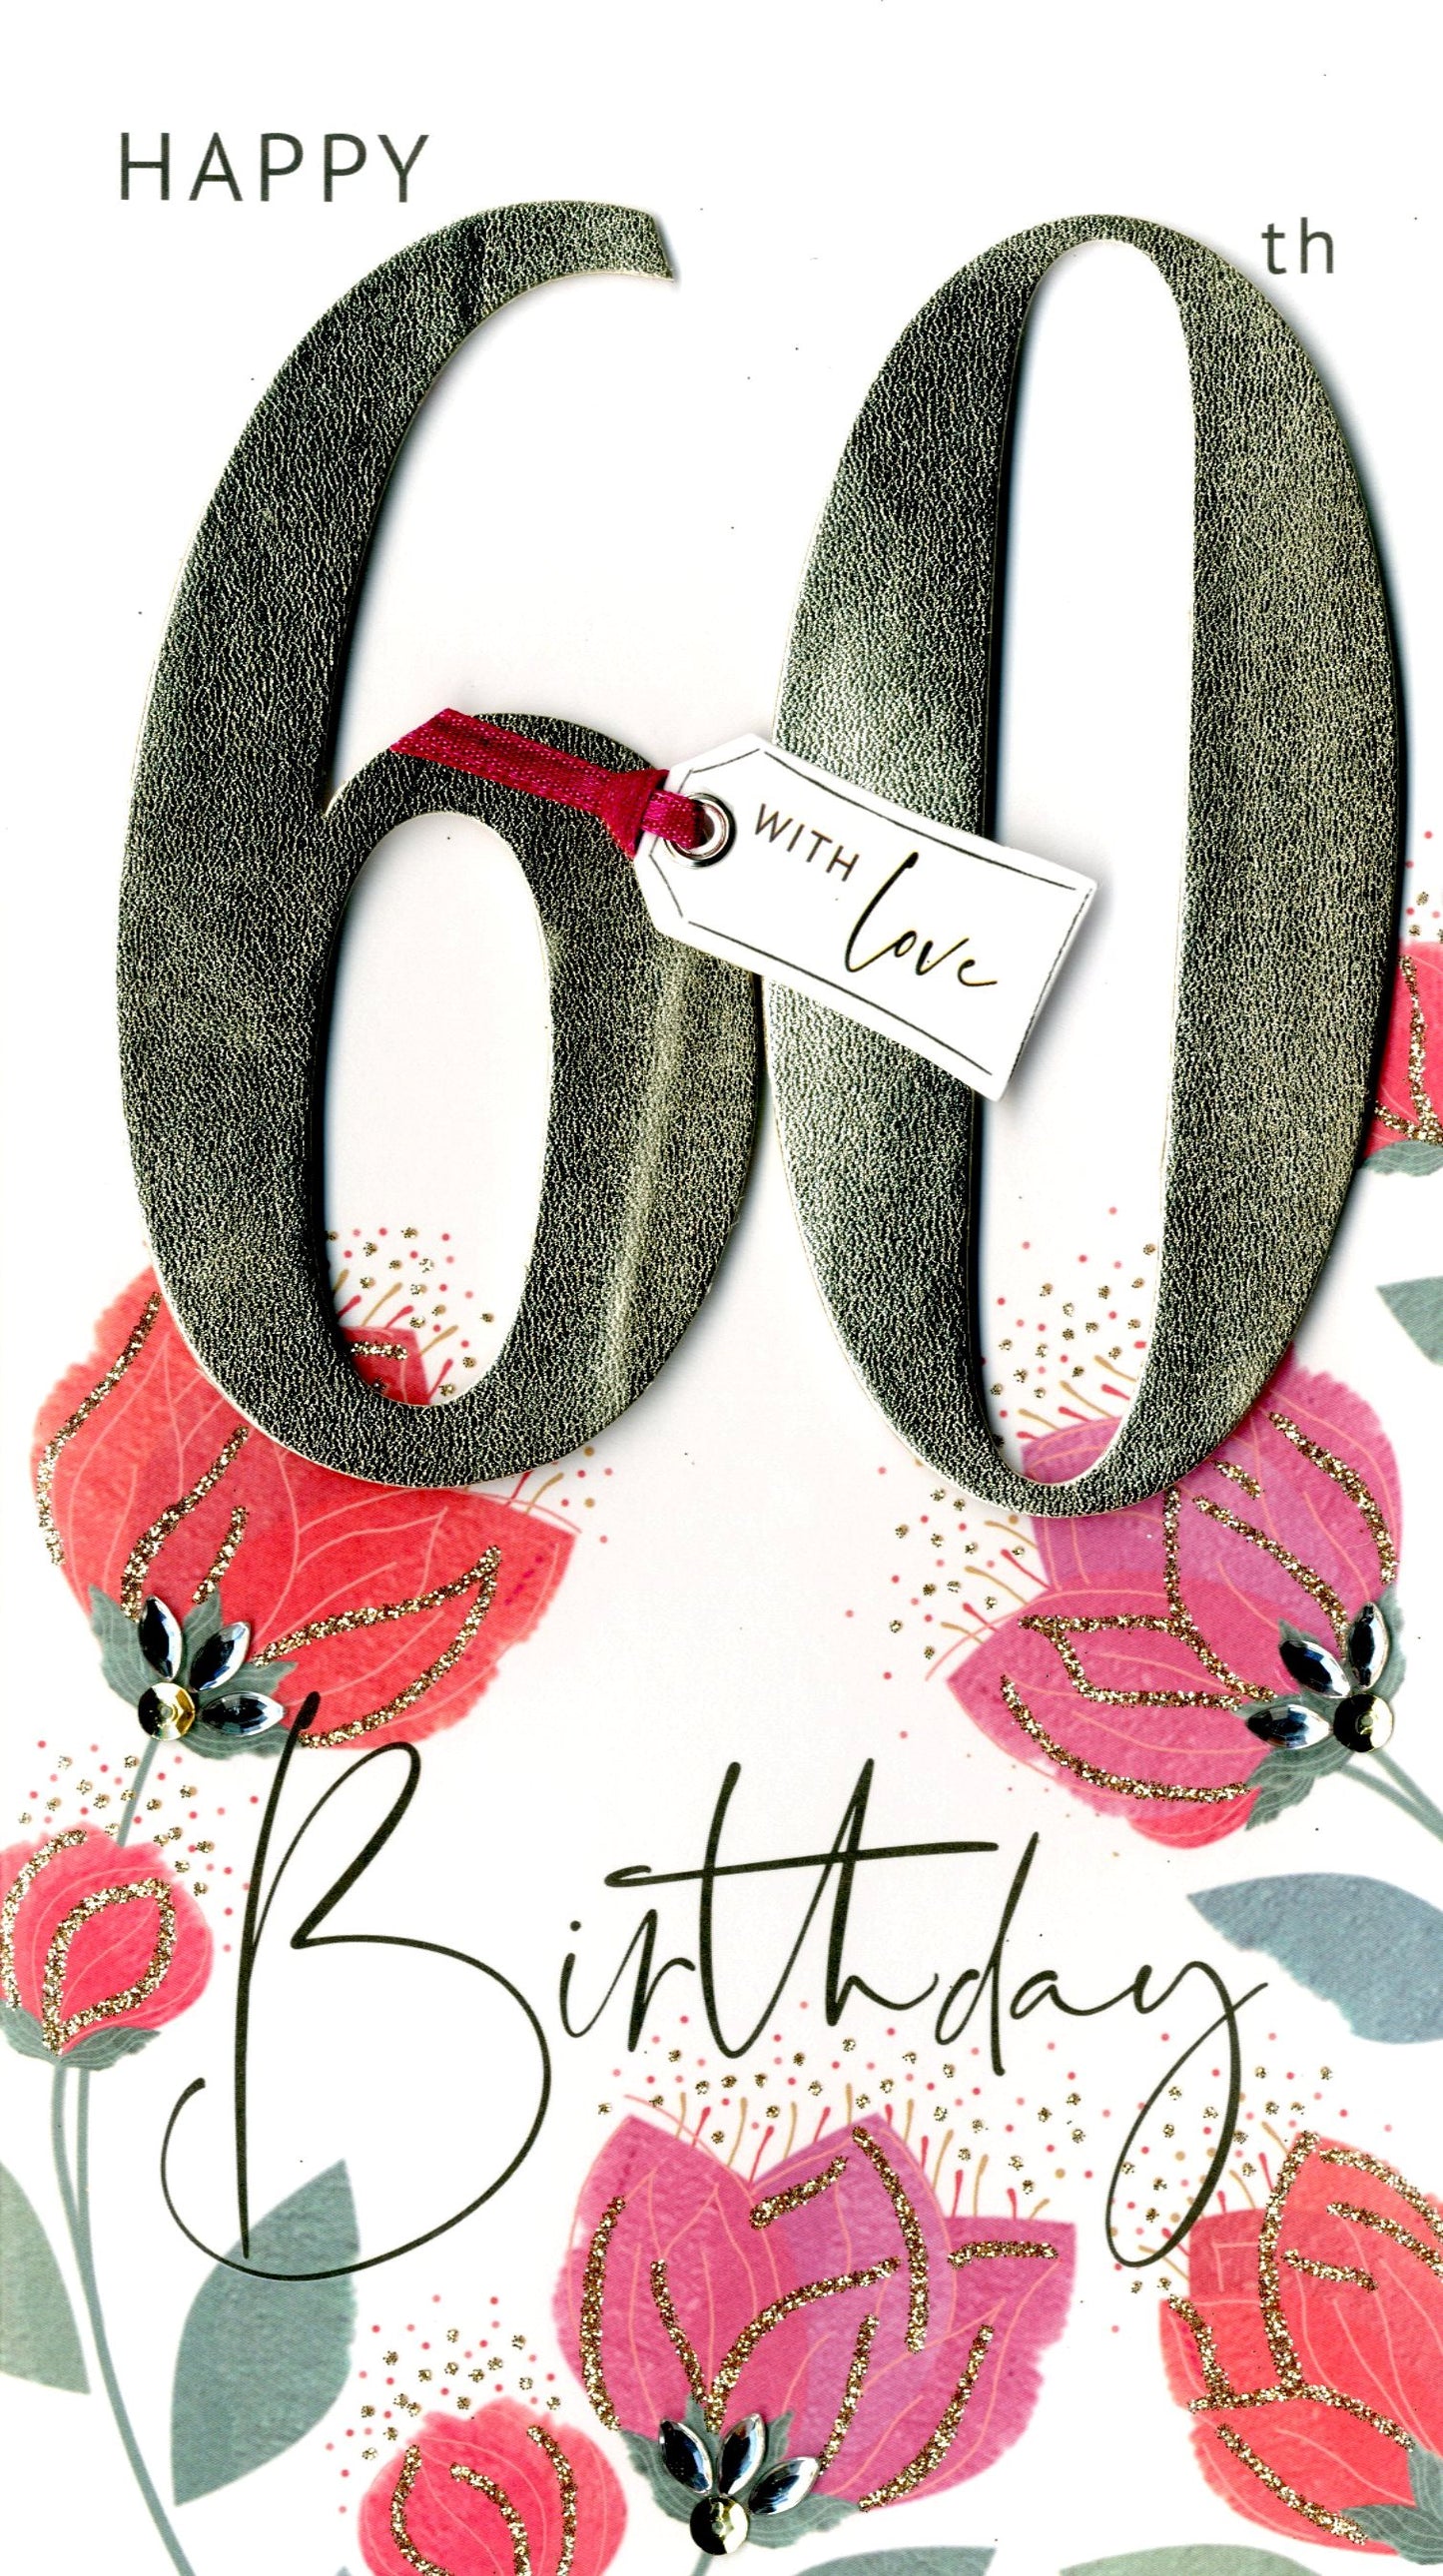 60th Birthday Greeting Card Hand-Finished